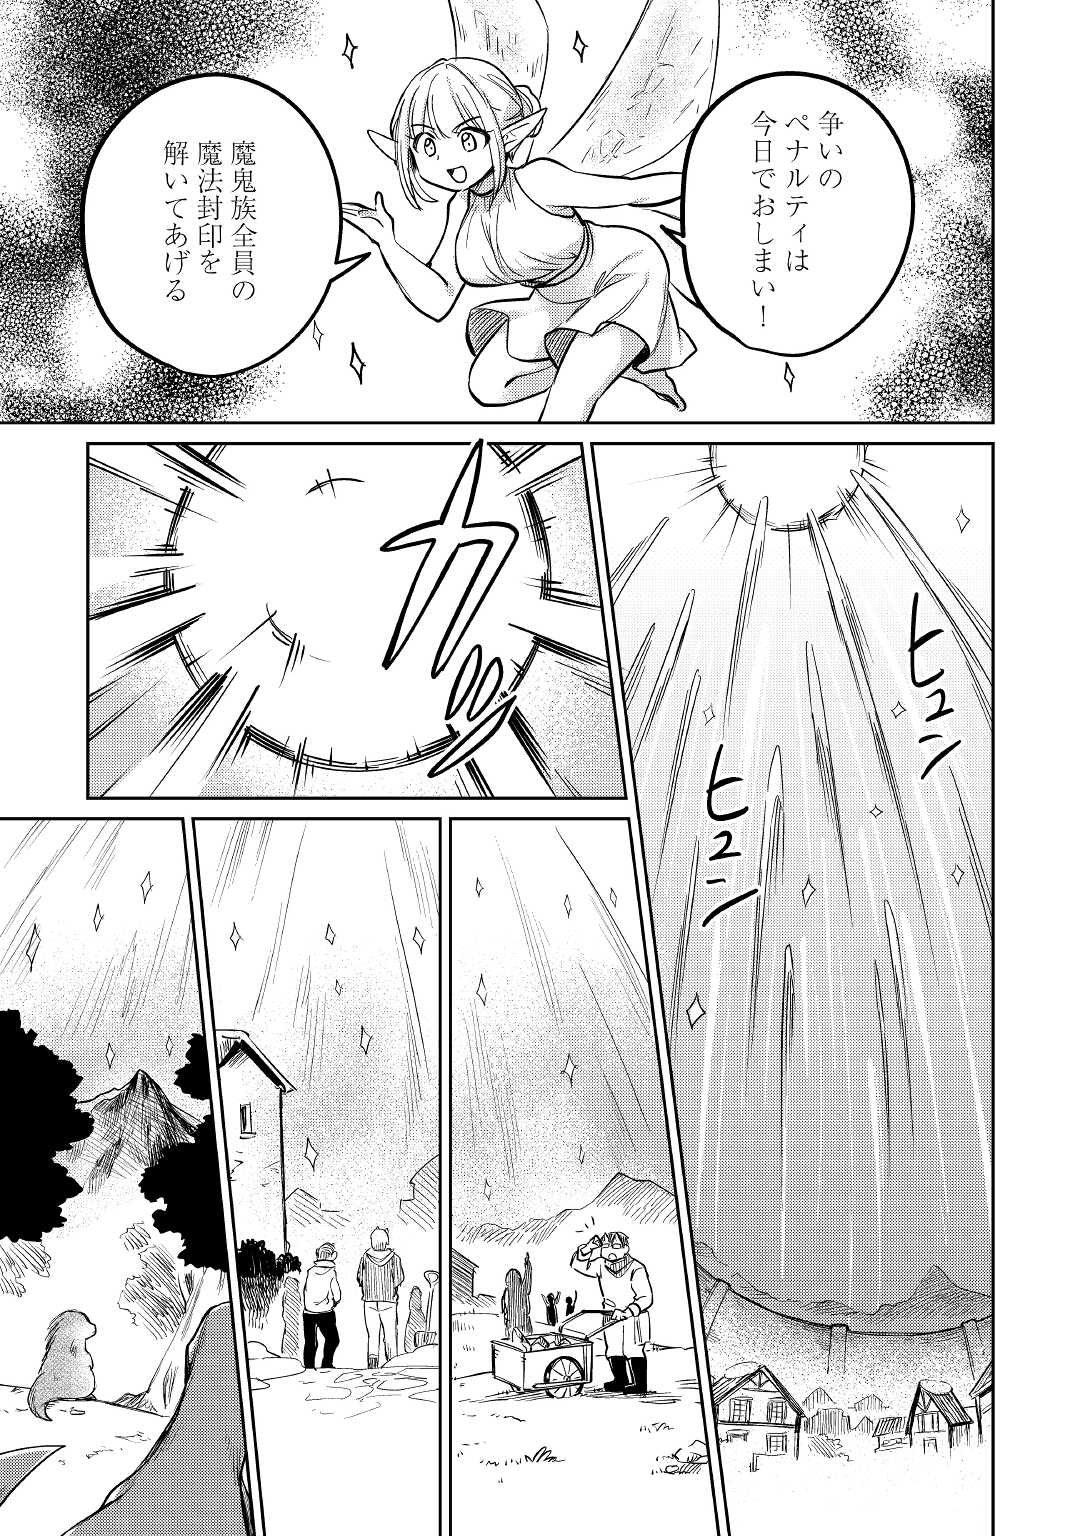 The Former Structural Researcher’s Story of Otherworldly Adventure 第40話 - Page 29